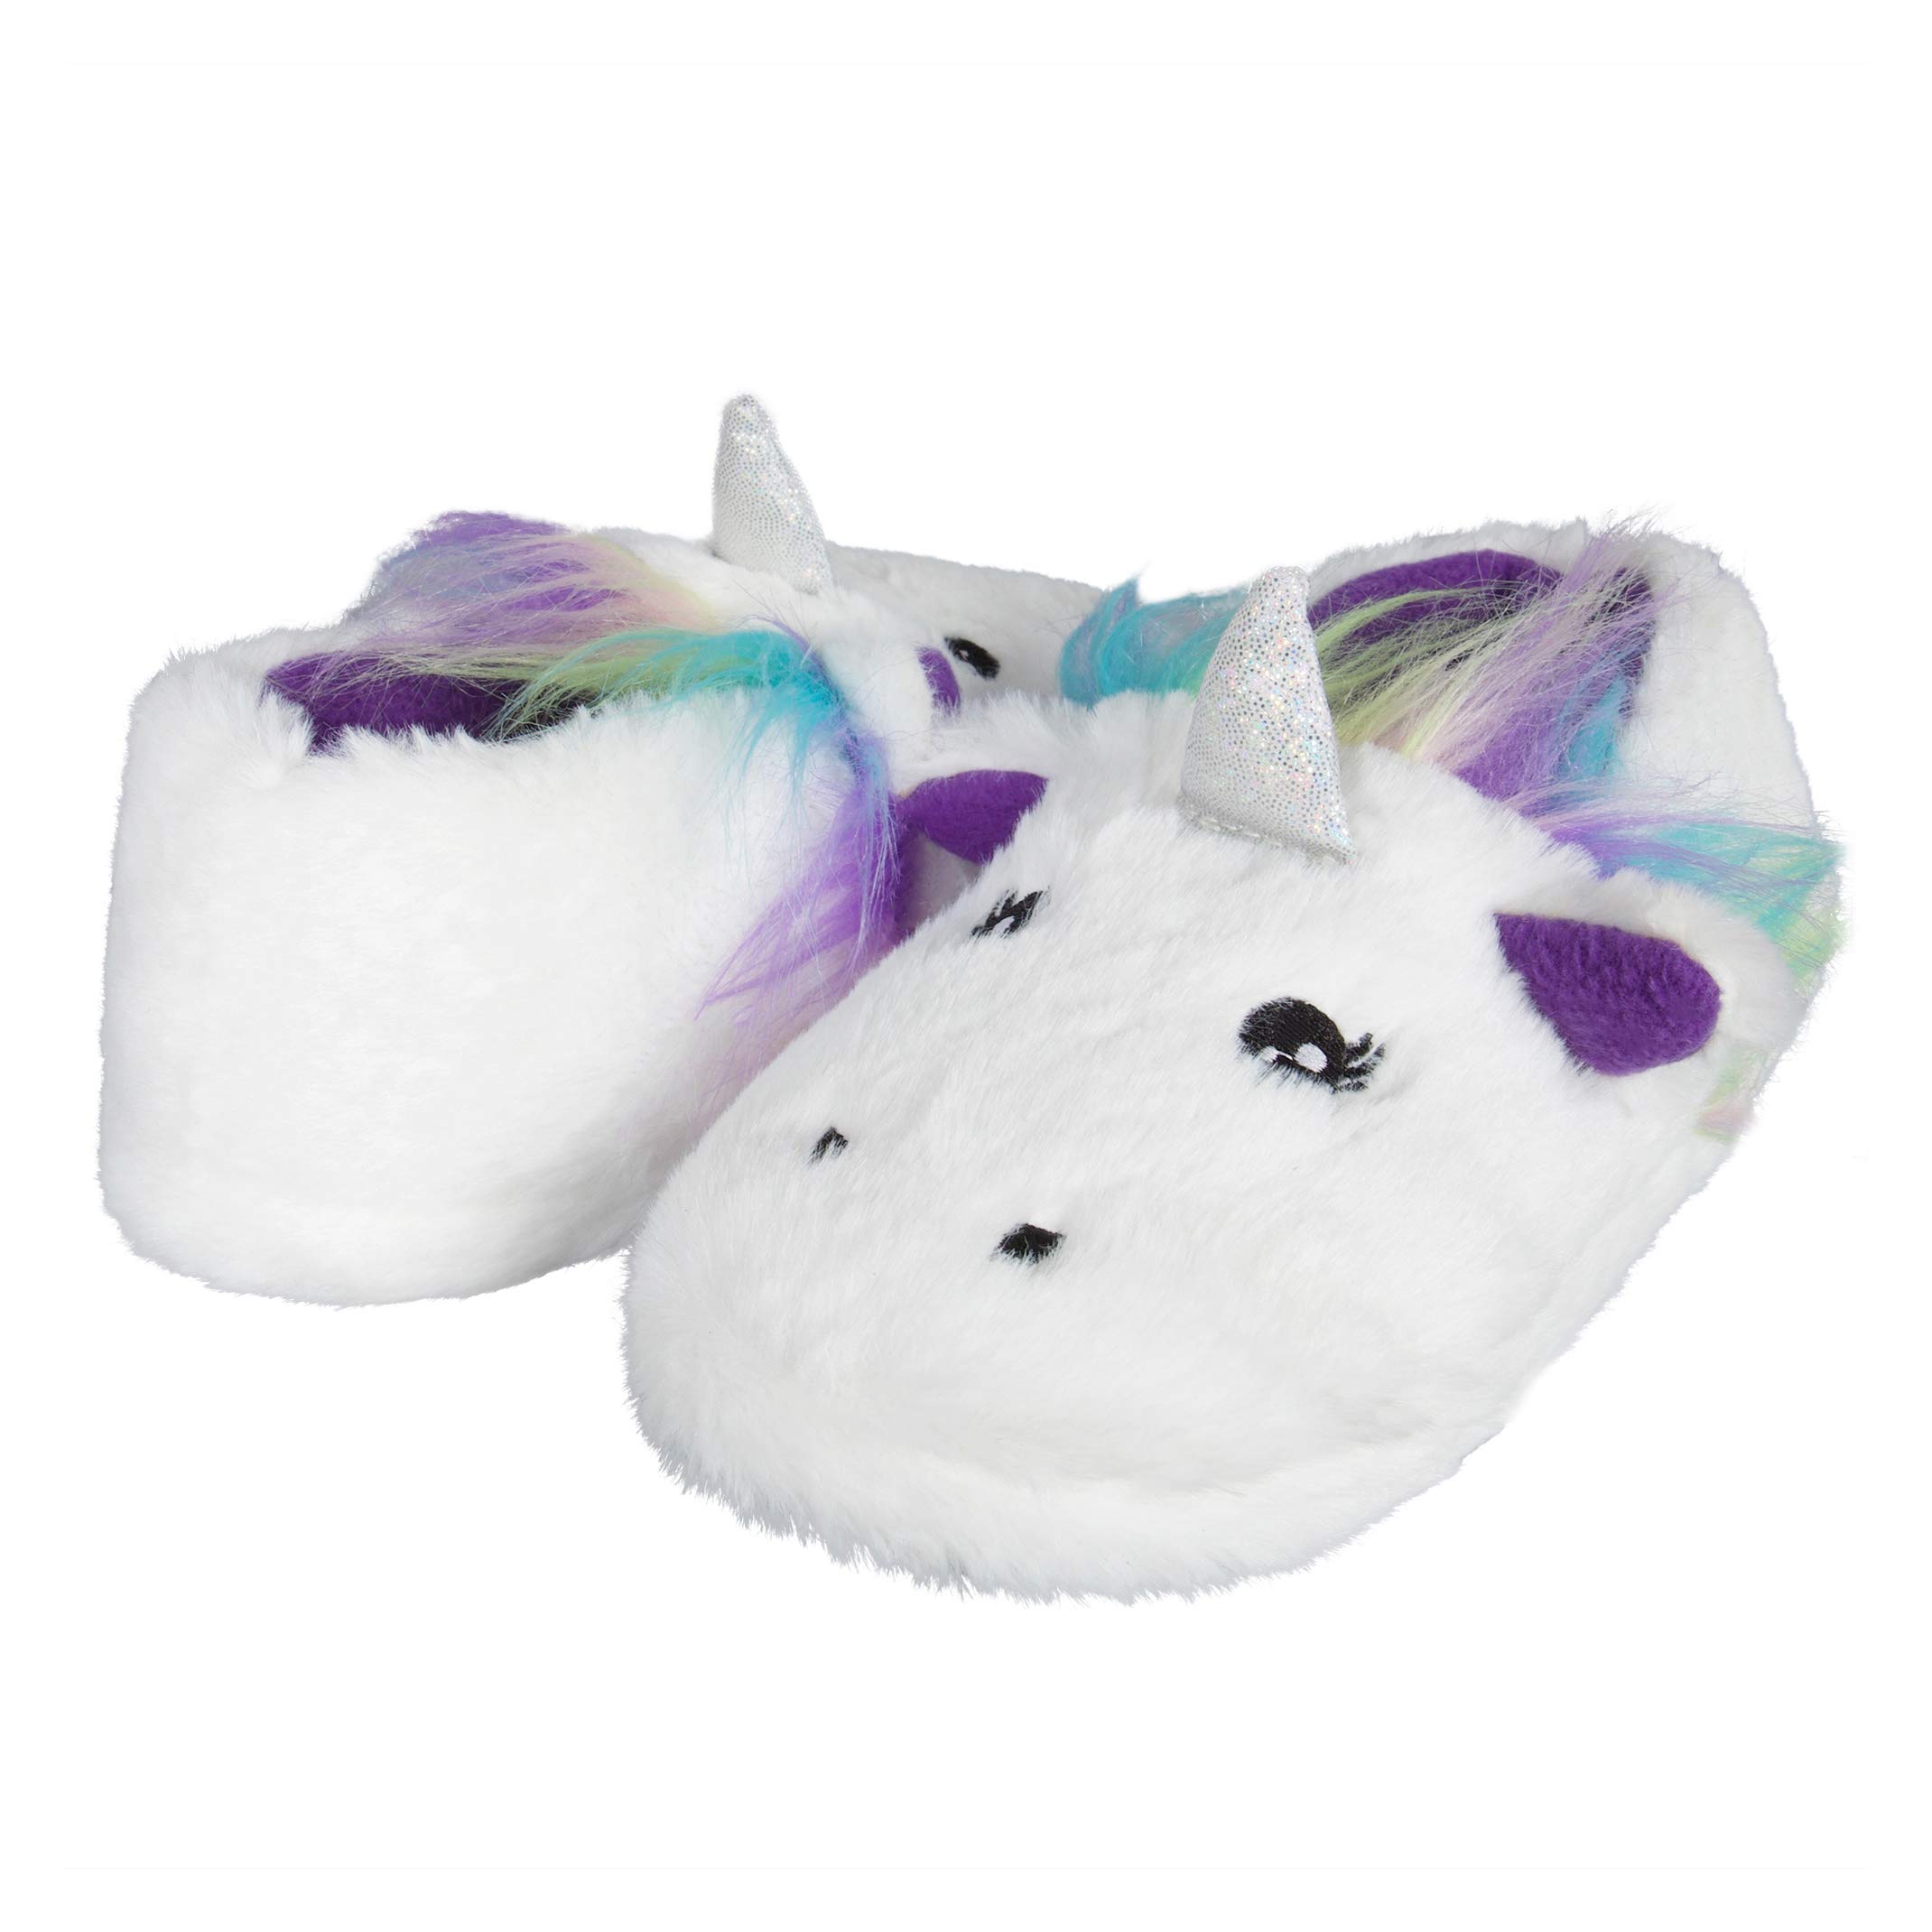 Jessica Simpson Unisex-Child Cute and Cozy Plush Slip on House Slippers with Memory Foam